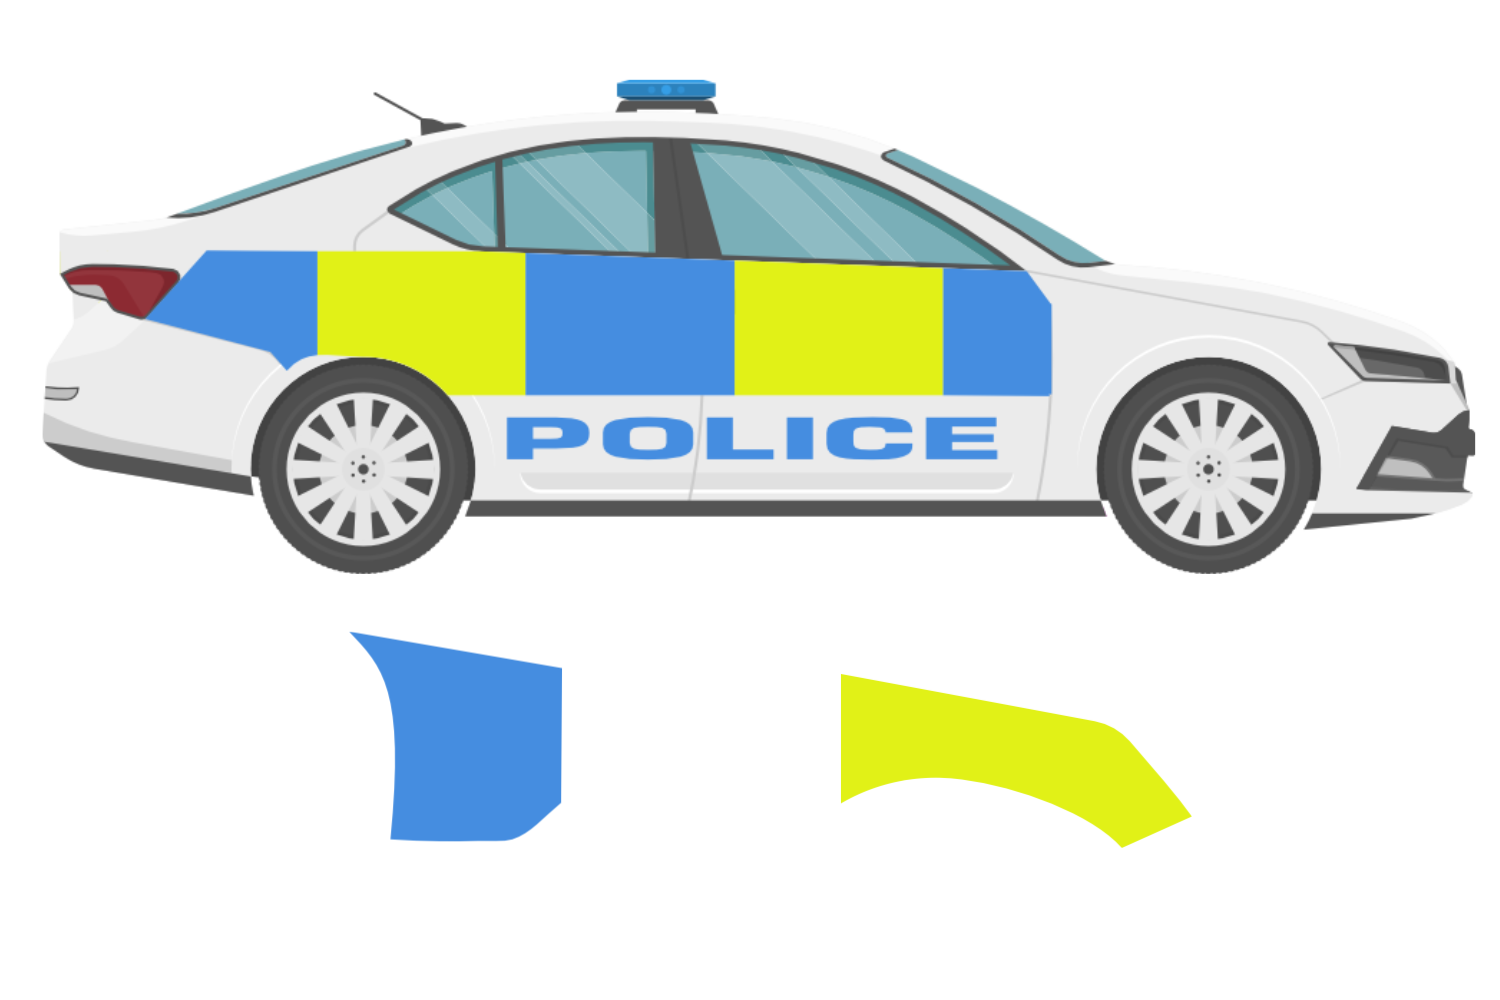 police-car-missing-front-markings